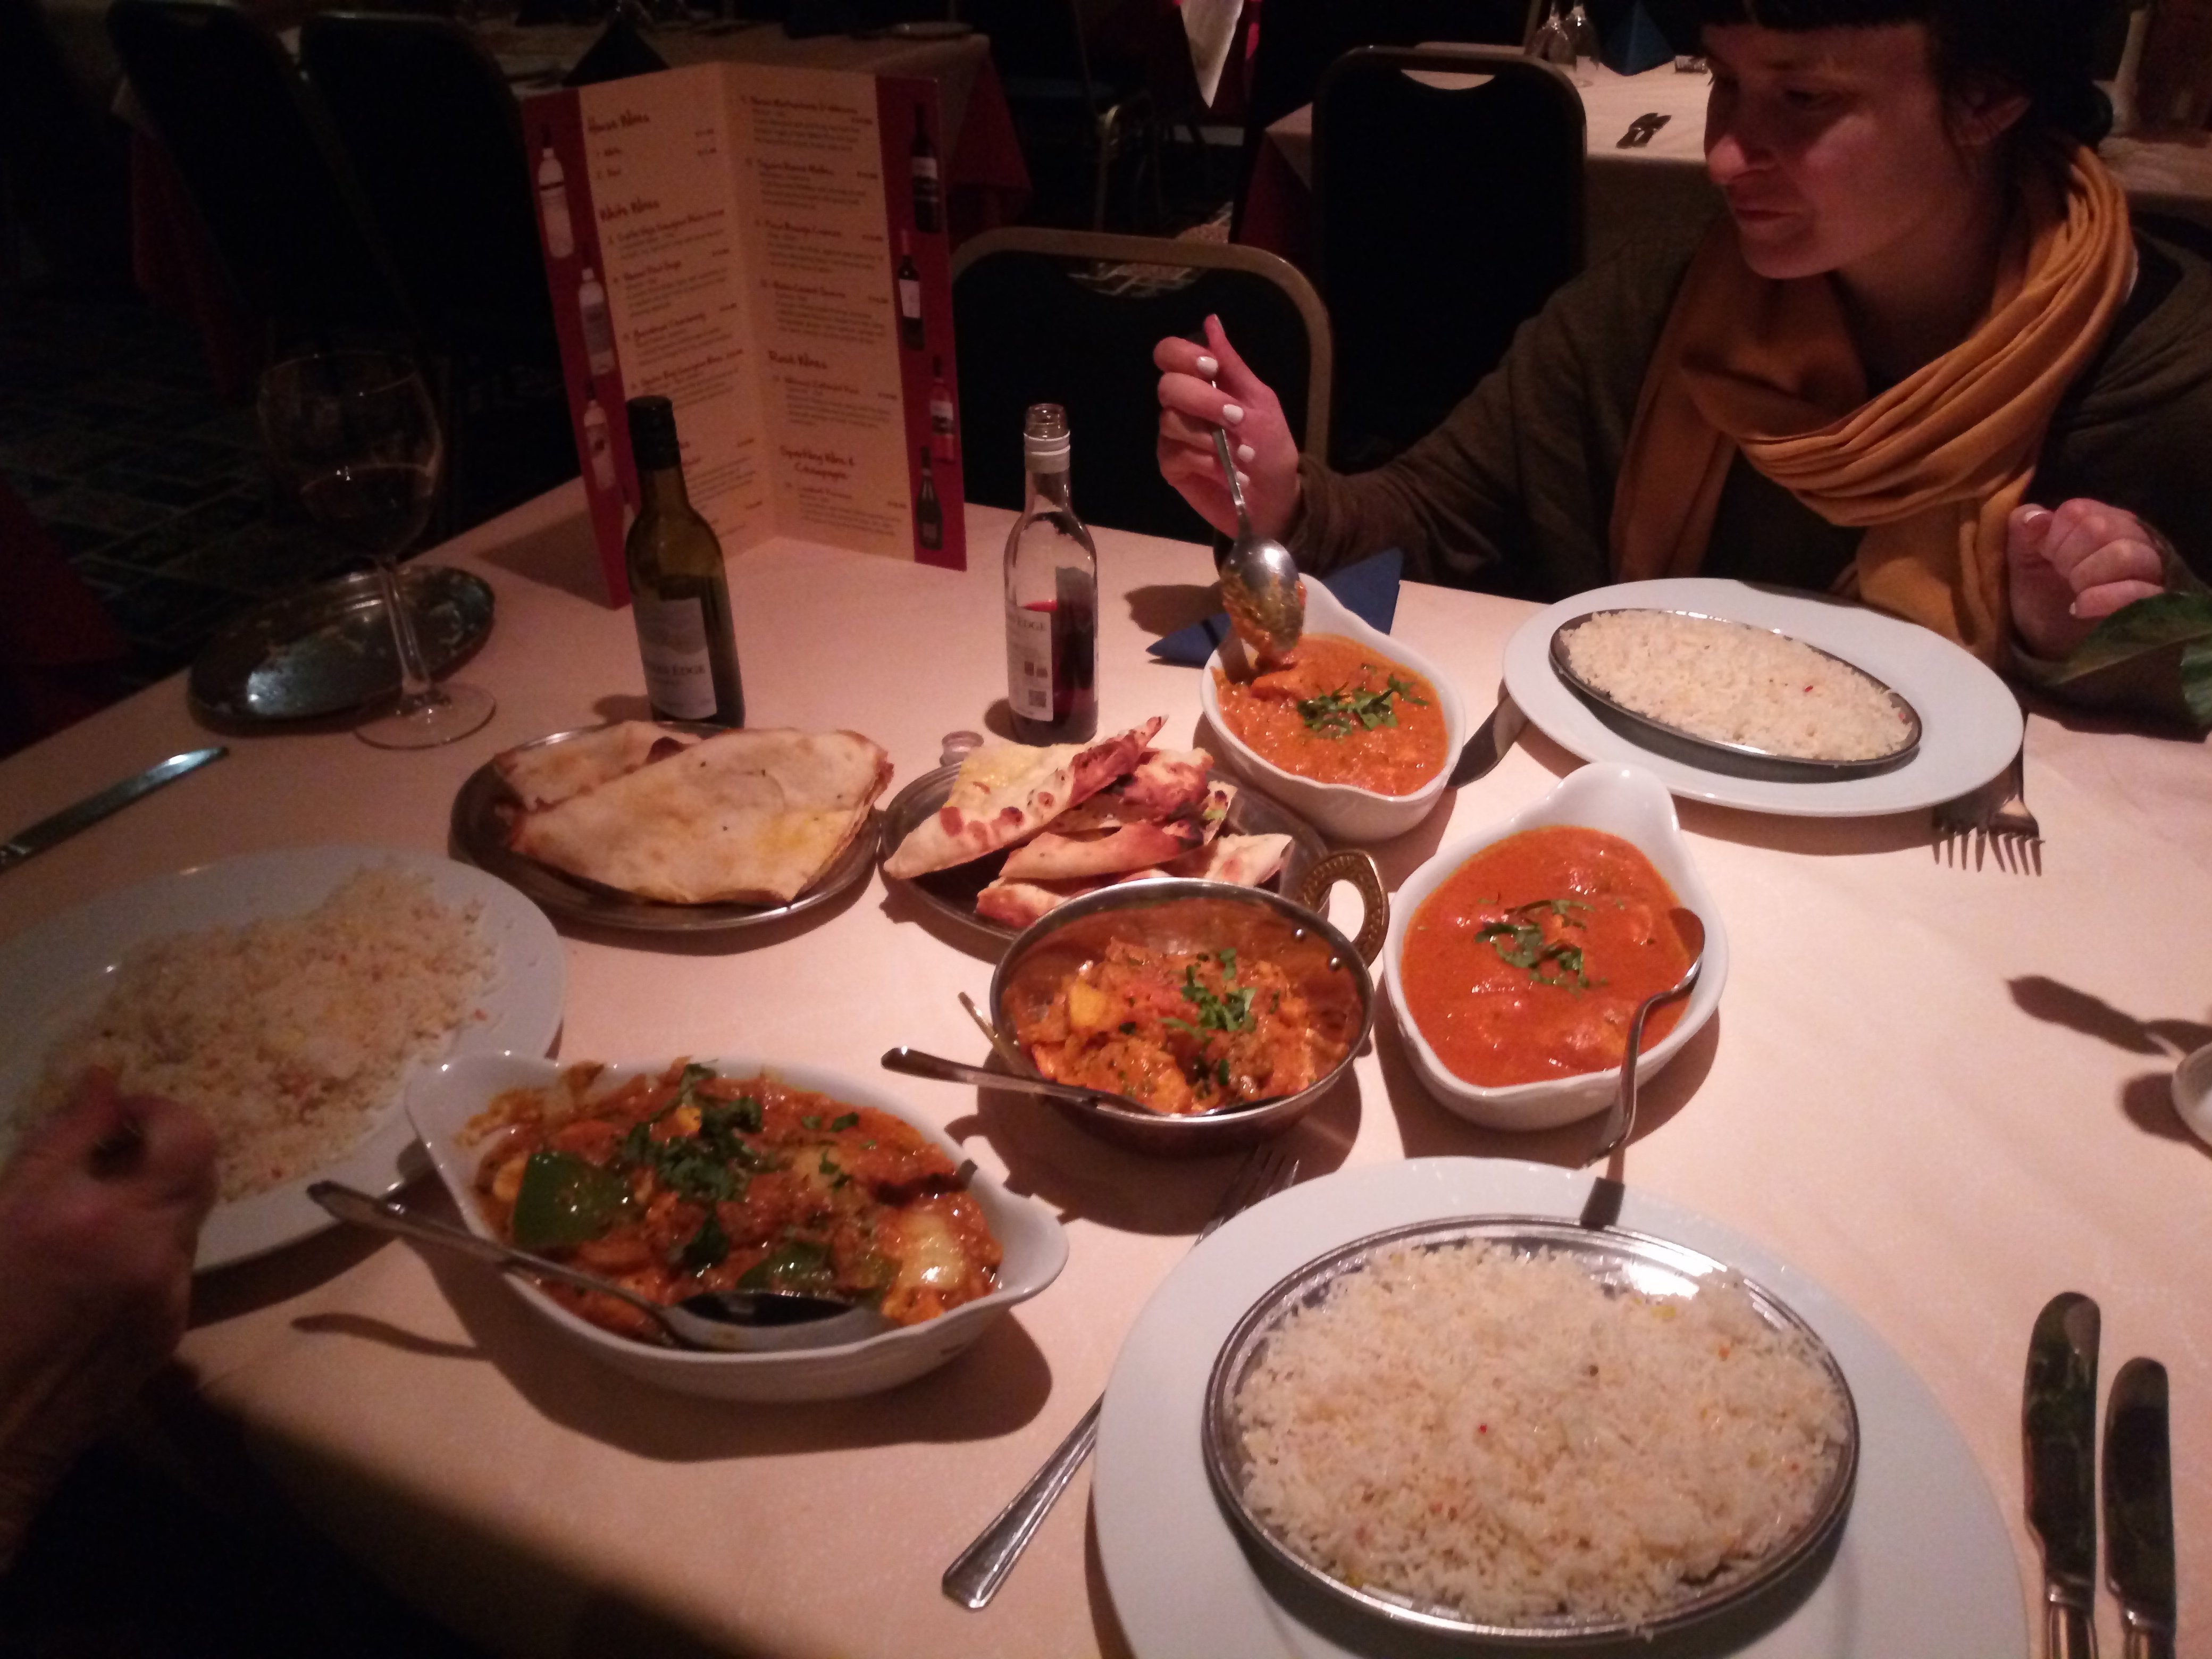 Bengal Spice Indian Restaurant and Takeaway#1inUK